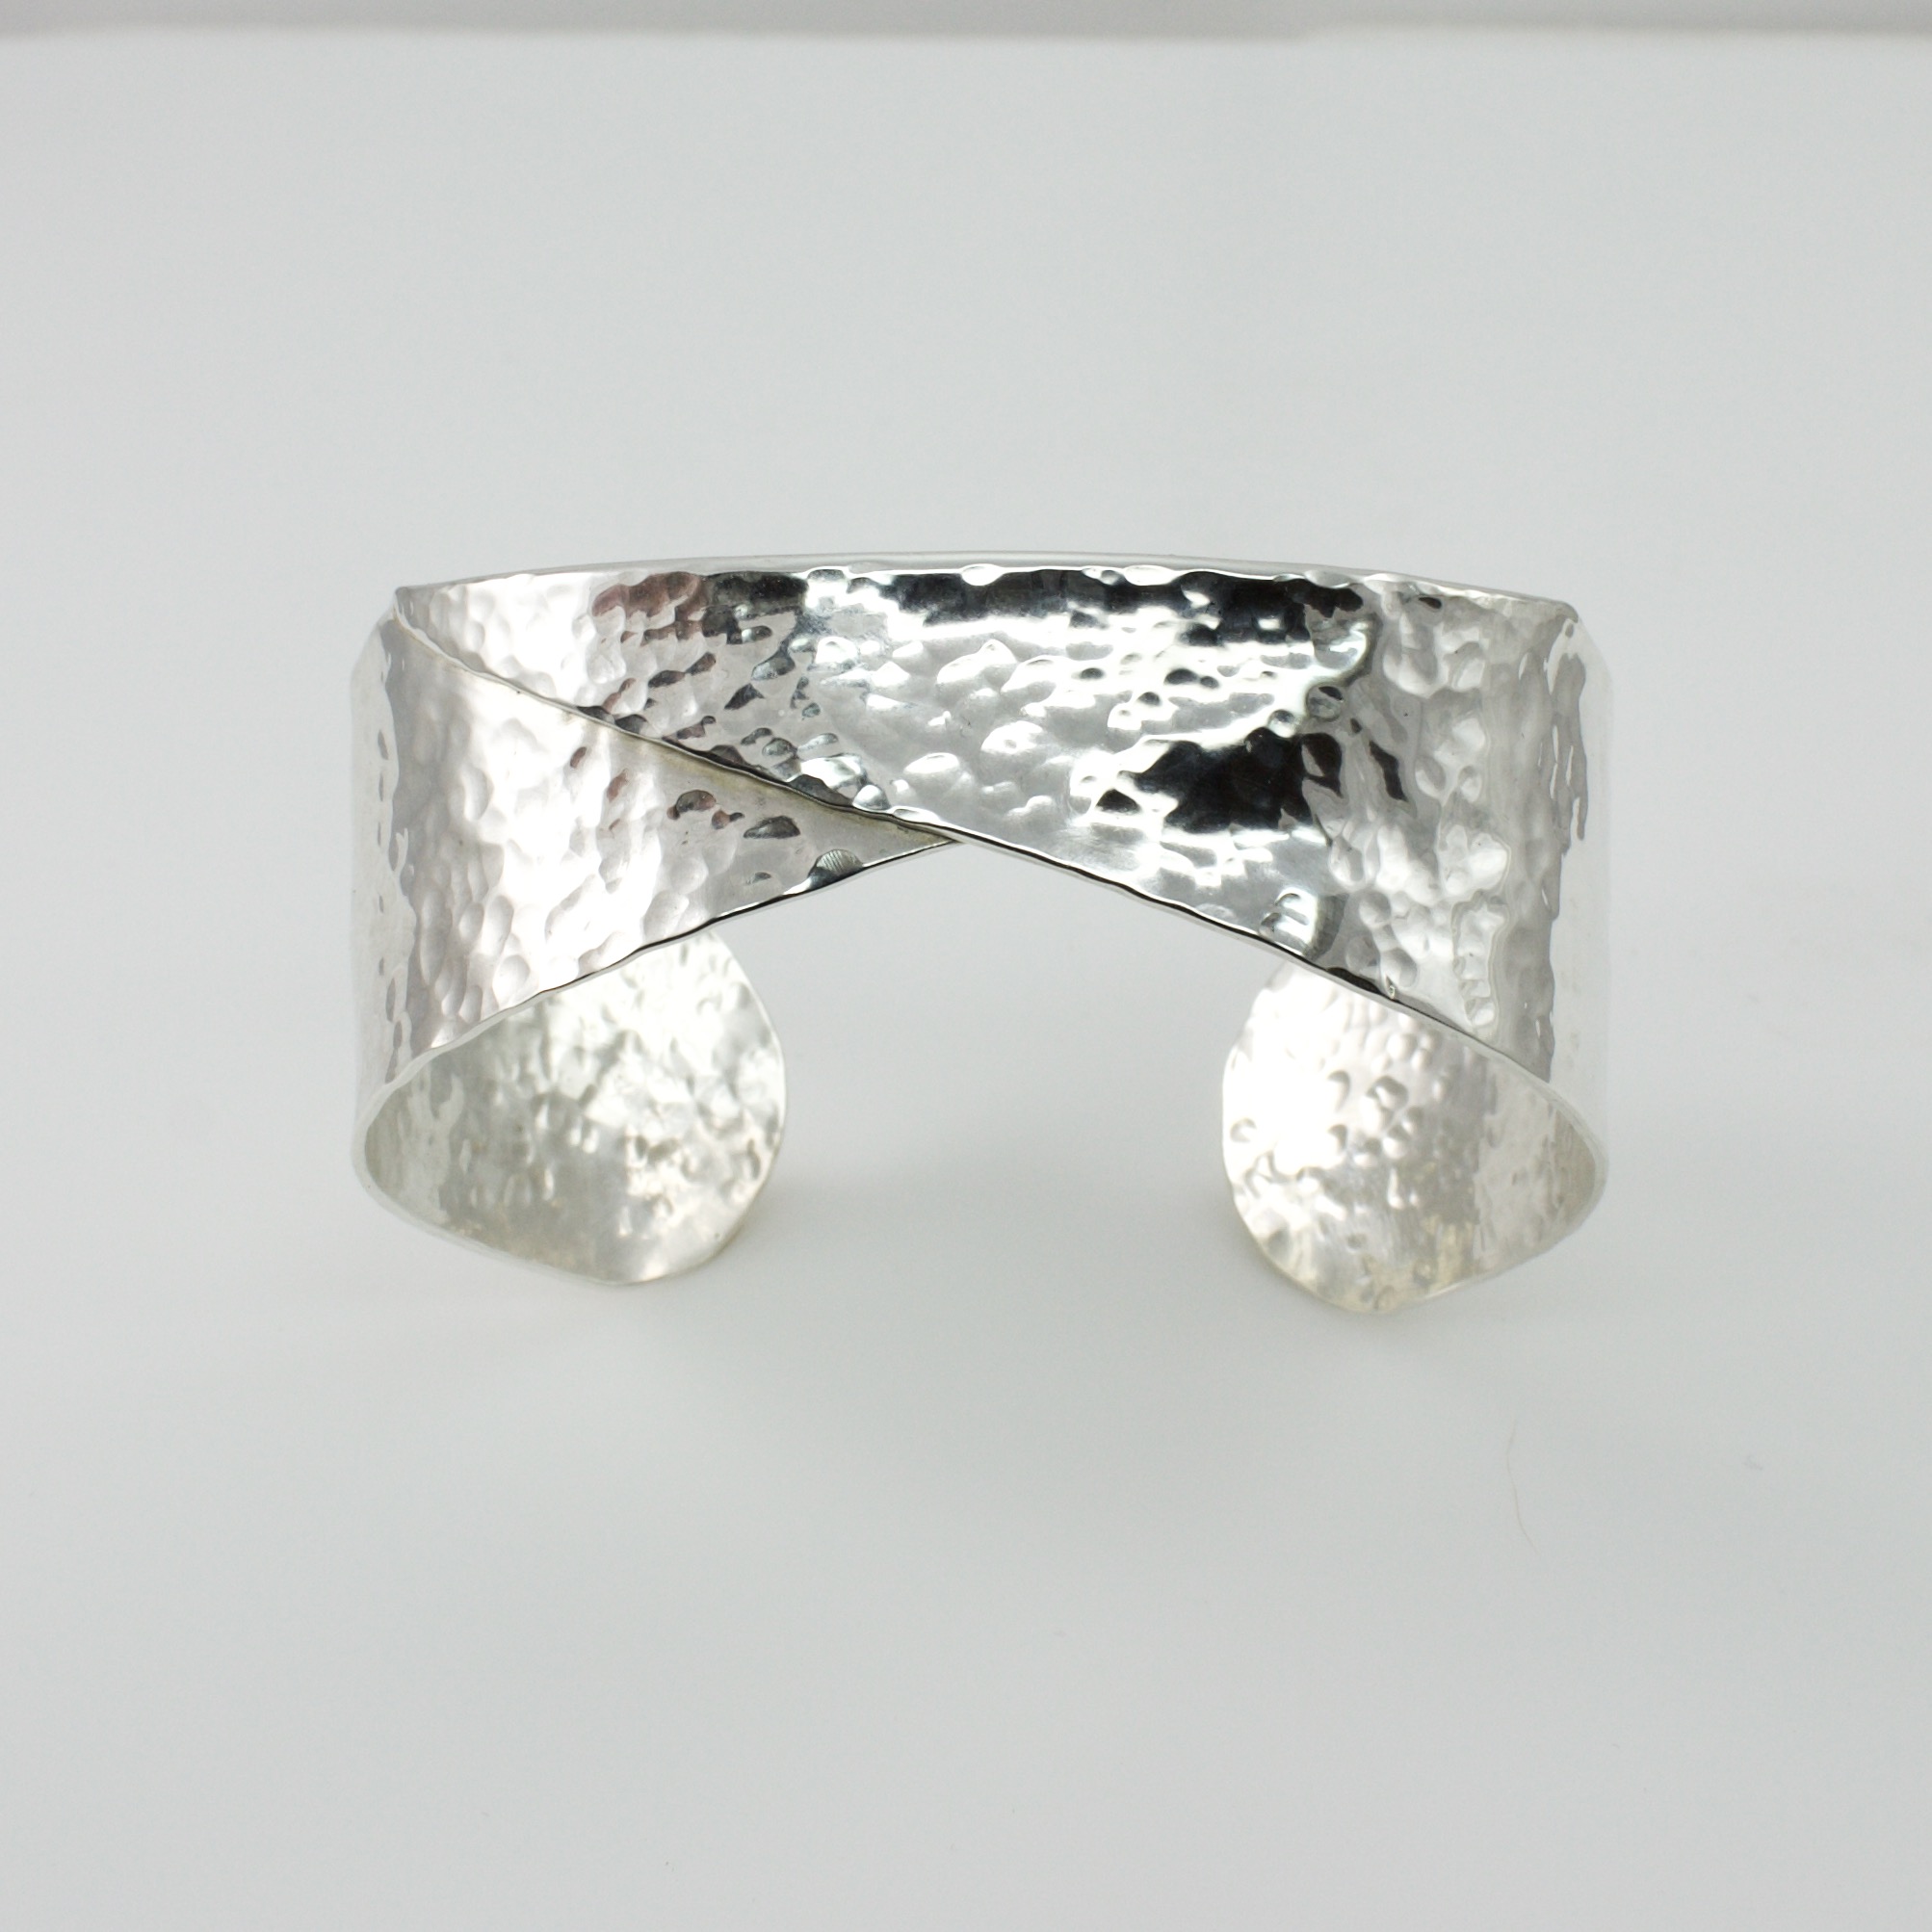 Buy Thick Sterling Silver Cuff Bracelet With Hammered Texture and Sparkly  Finish Online in India - Etsy